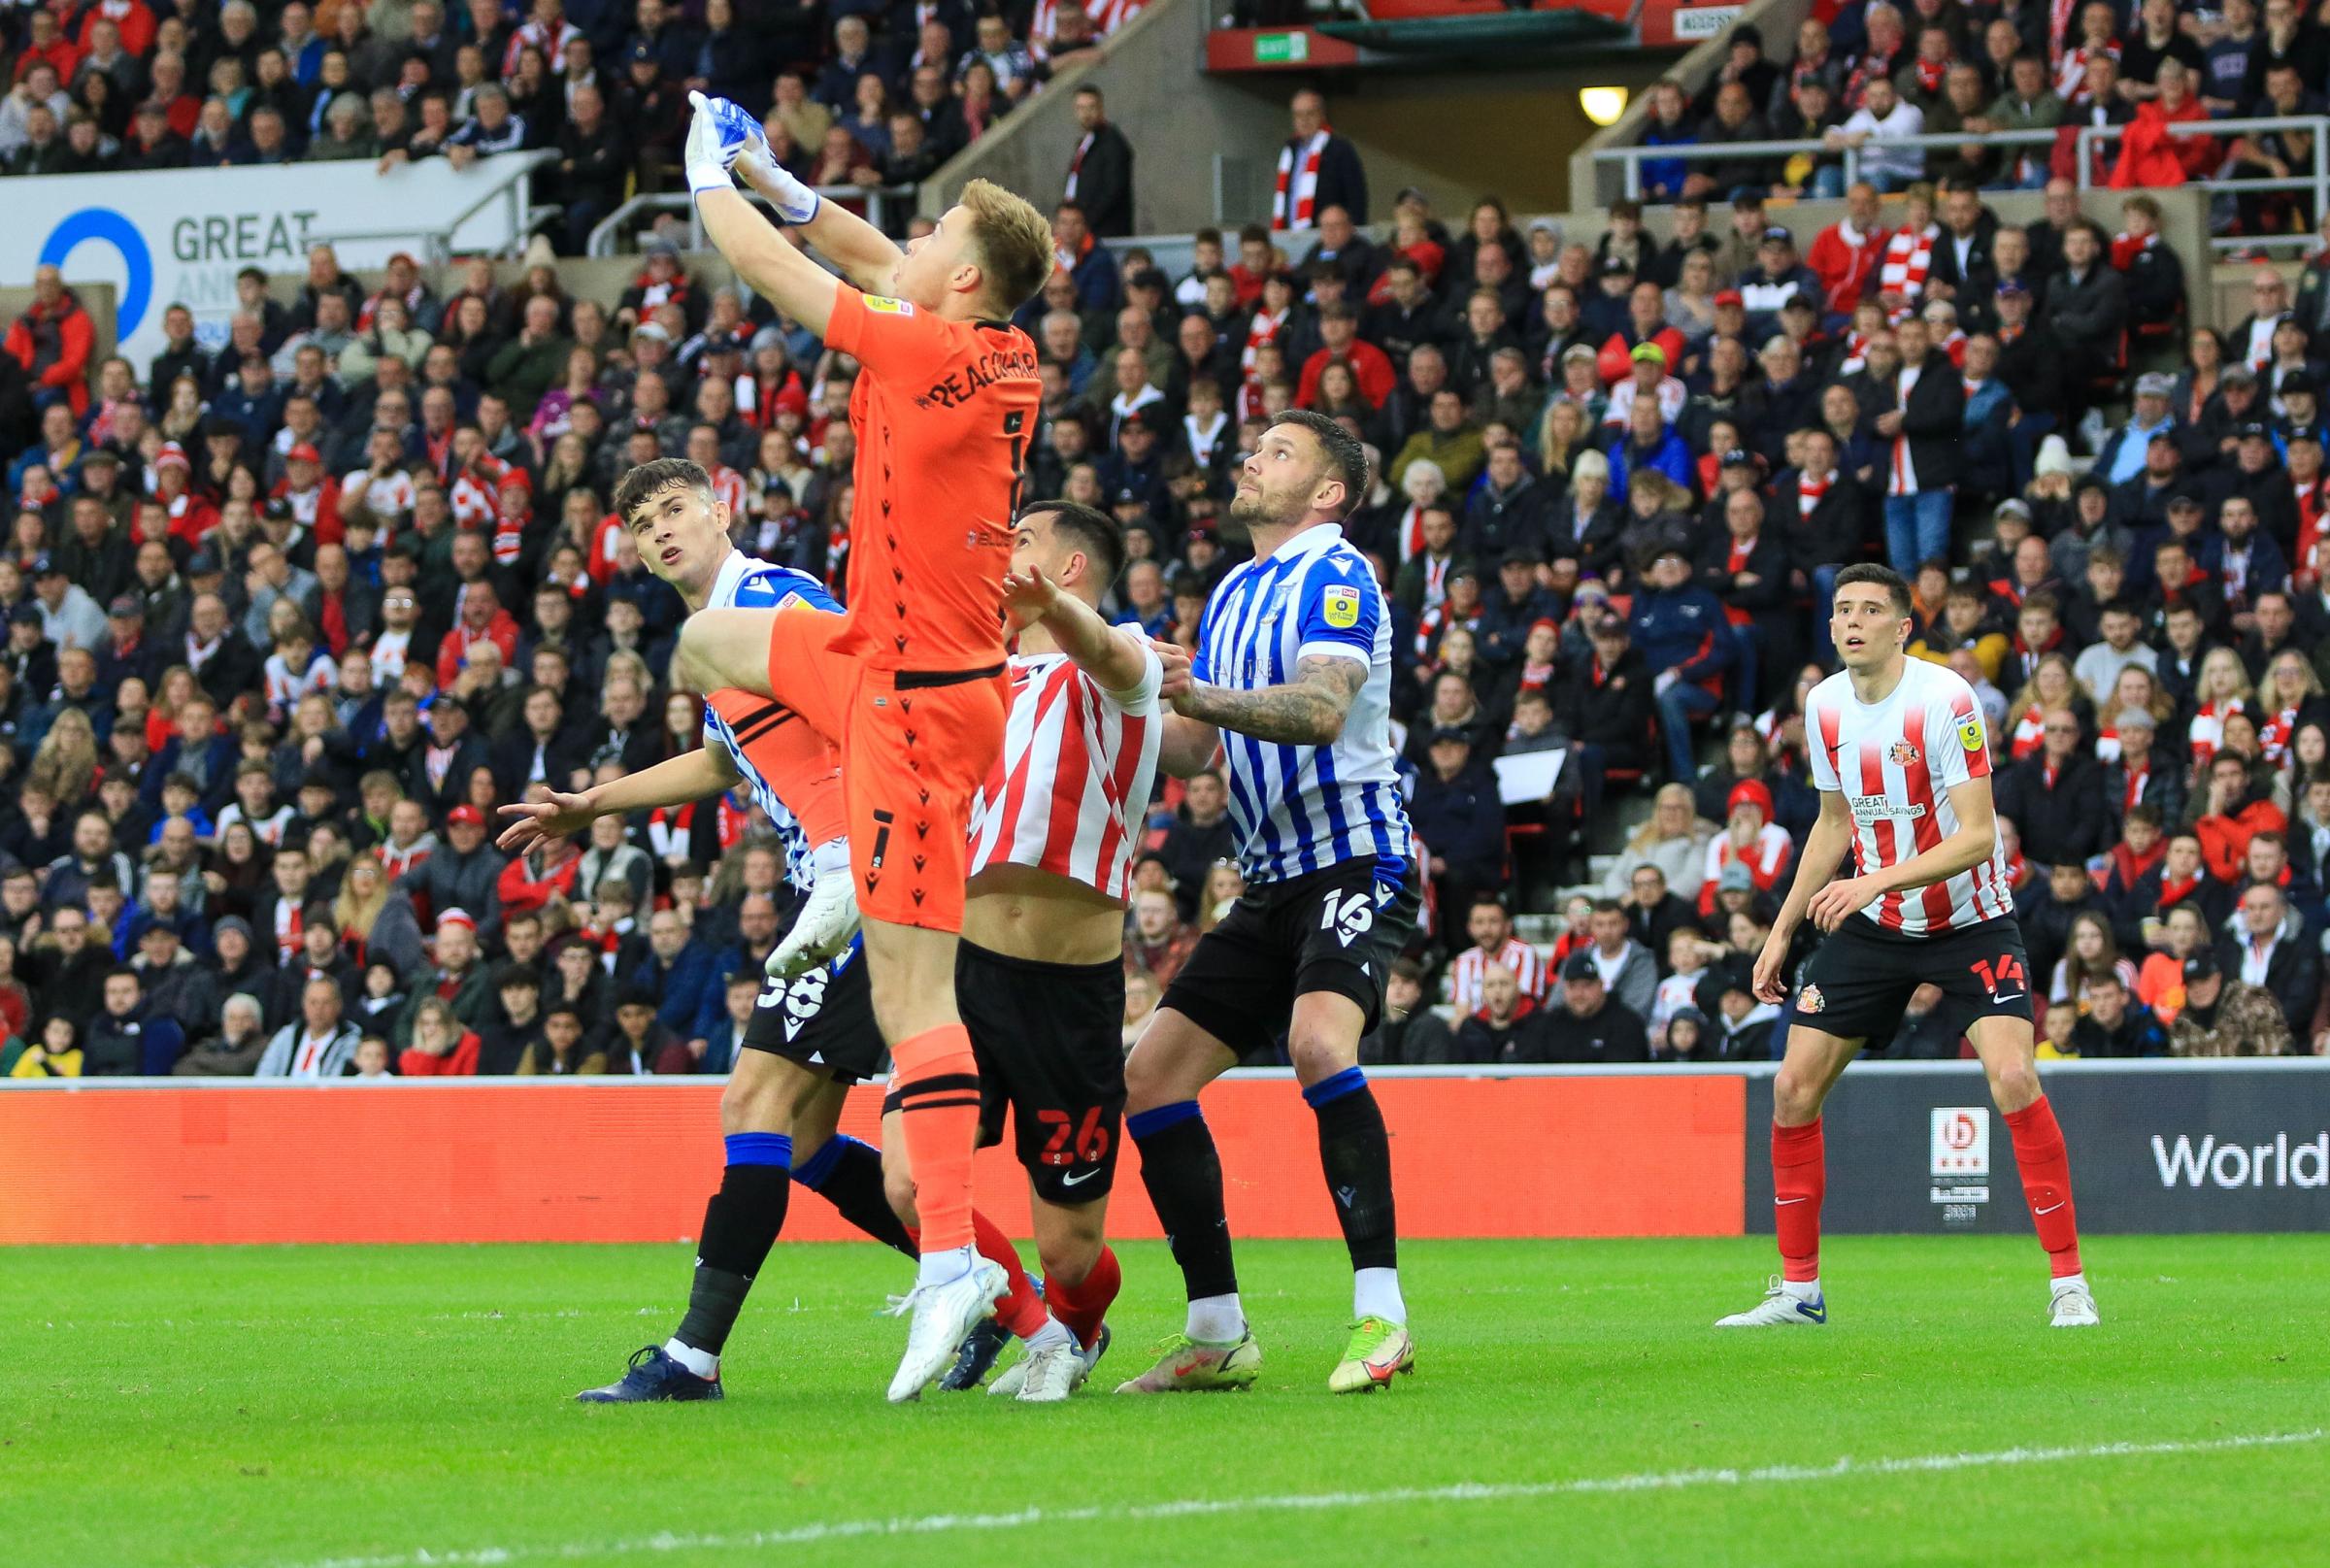 ANALYSIS: Sheff Wed's risky game plan undone by one slip up but Sunderland have huge task ahead